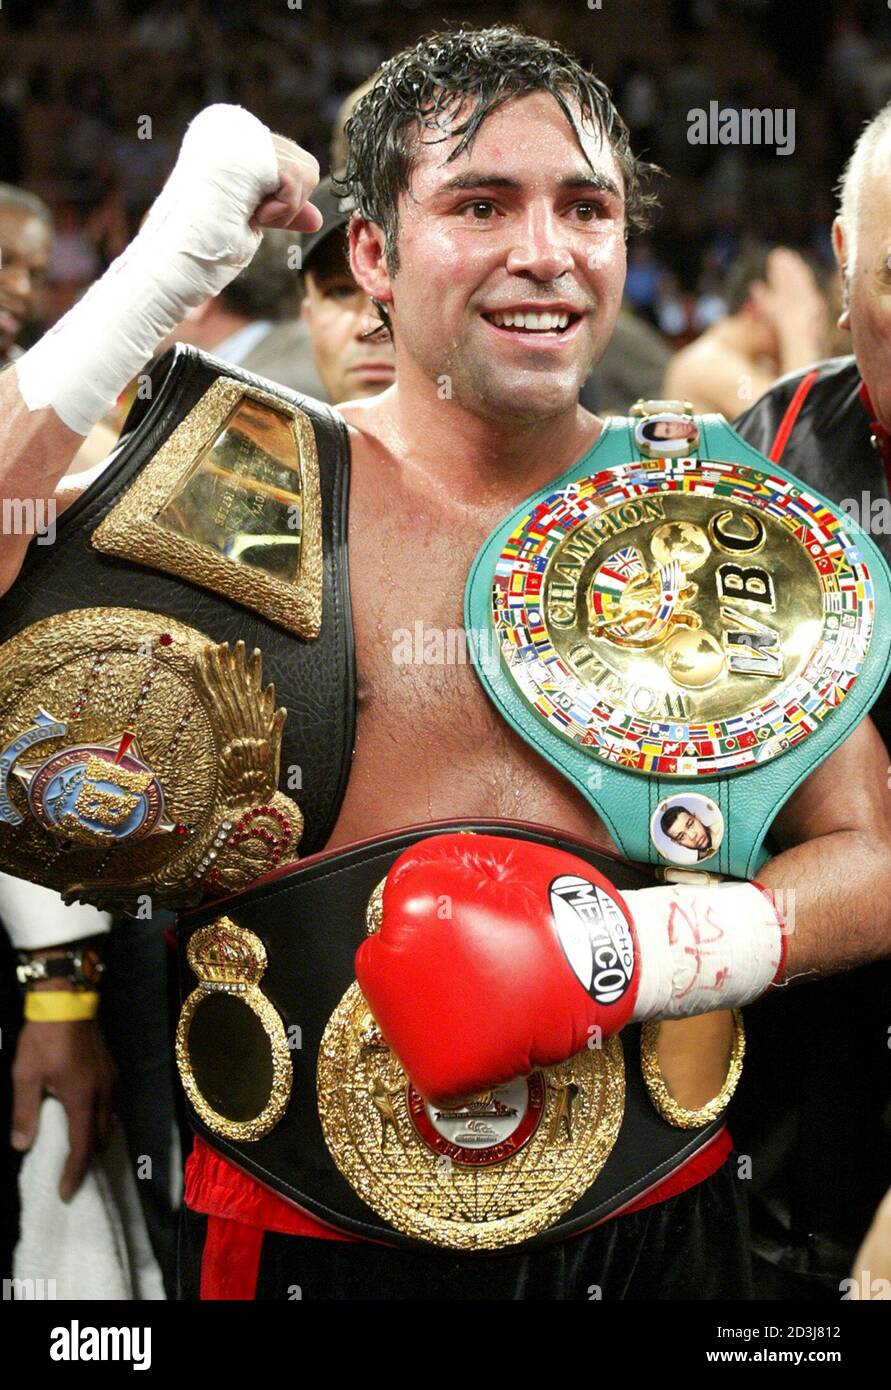 WBC/WBA super welterweight champion Oscar De La Hoya of Los Angeles poses with belts after defeating Yory Boy Campas of Navojoa, Mexico at the Mandalay Bay Events Center in Las Vegas, Nevada, May 3, 2003. De La Hoya won the fight with a technical knockout when referee Vic Drakulich stopped the fight in the seventh round. REUTERS/Steve Marcus  SM/GAC Stock Photo